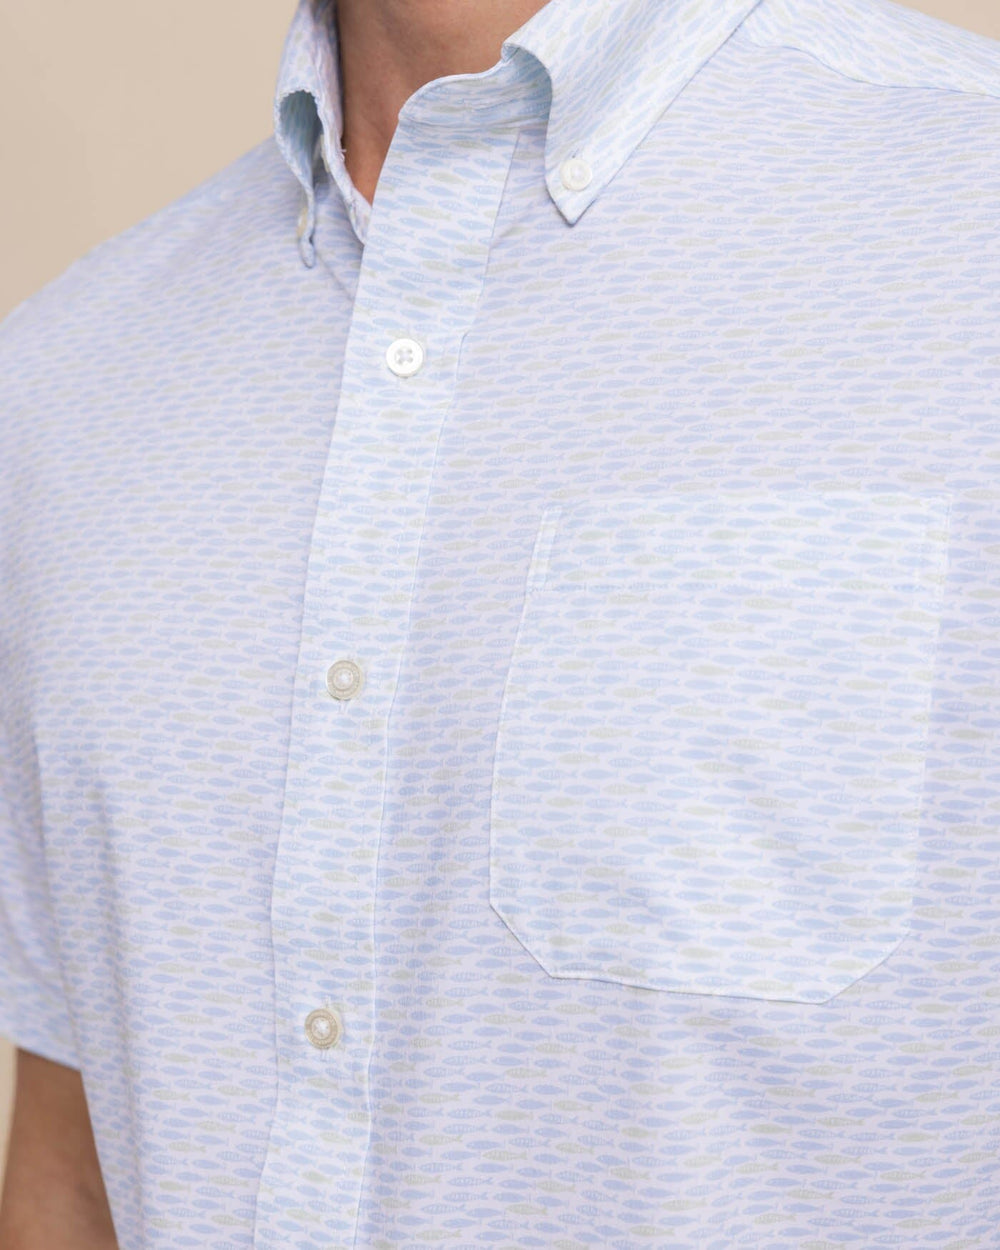 The detail view of the Southern Tide brrr Intercoastal Casual Water Short Sleeve SportShirt by Southern Tide - Classic White